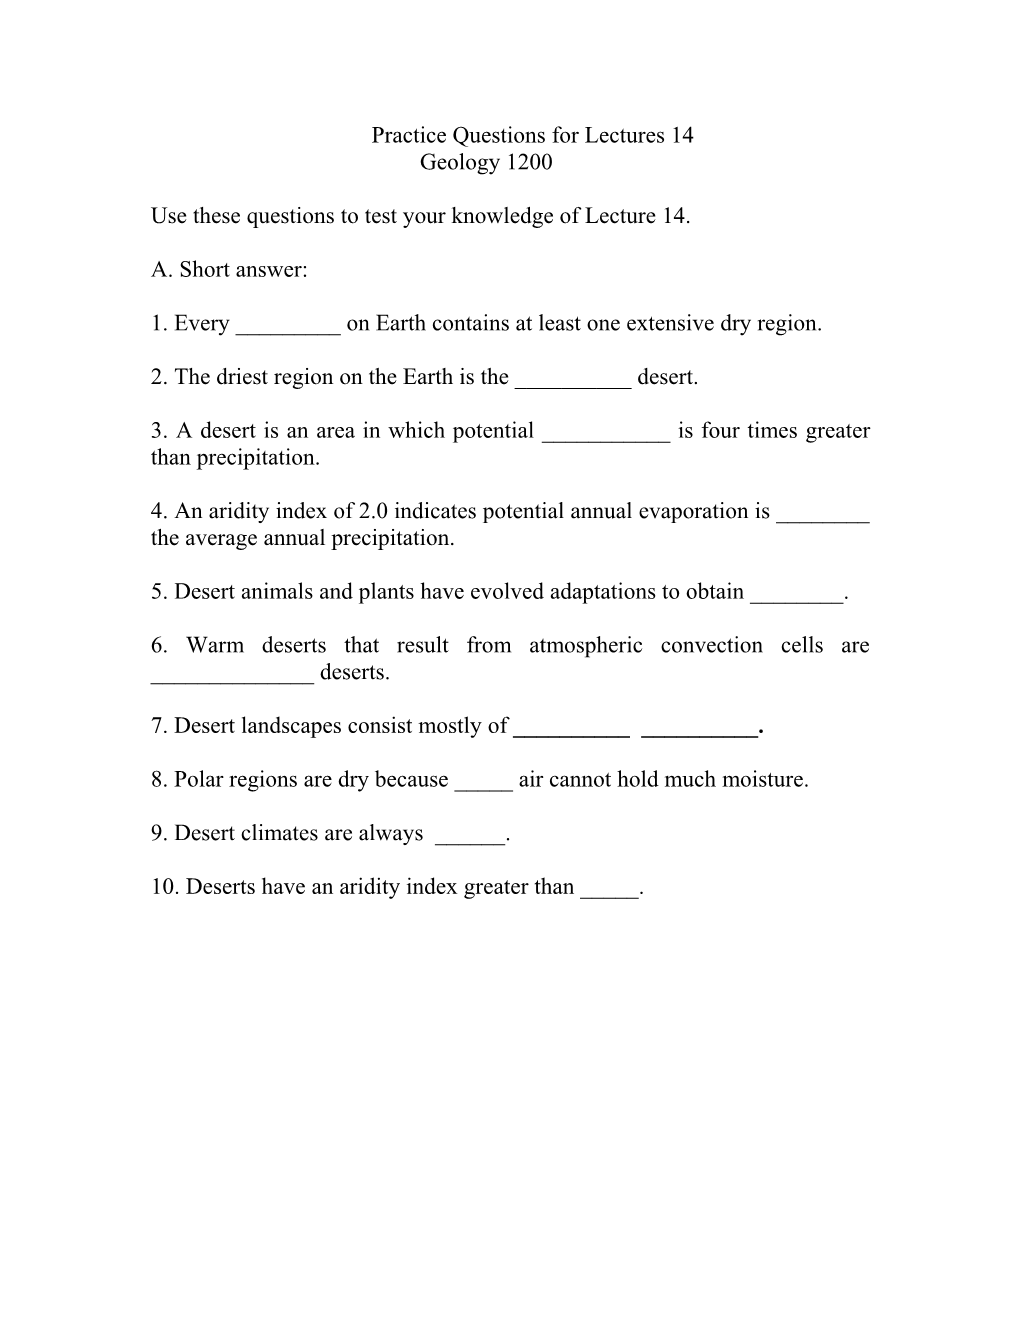 Use These Questions to Test Your Knowledge of Lecture 14